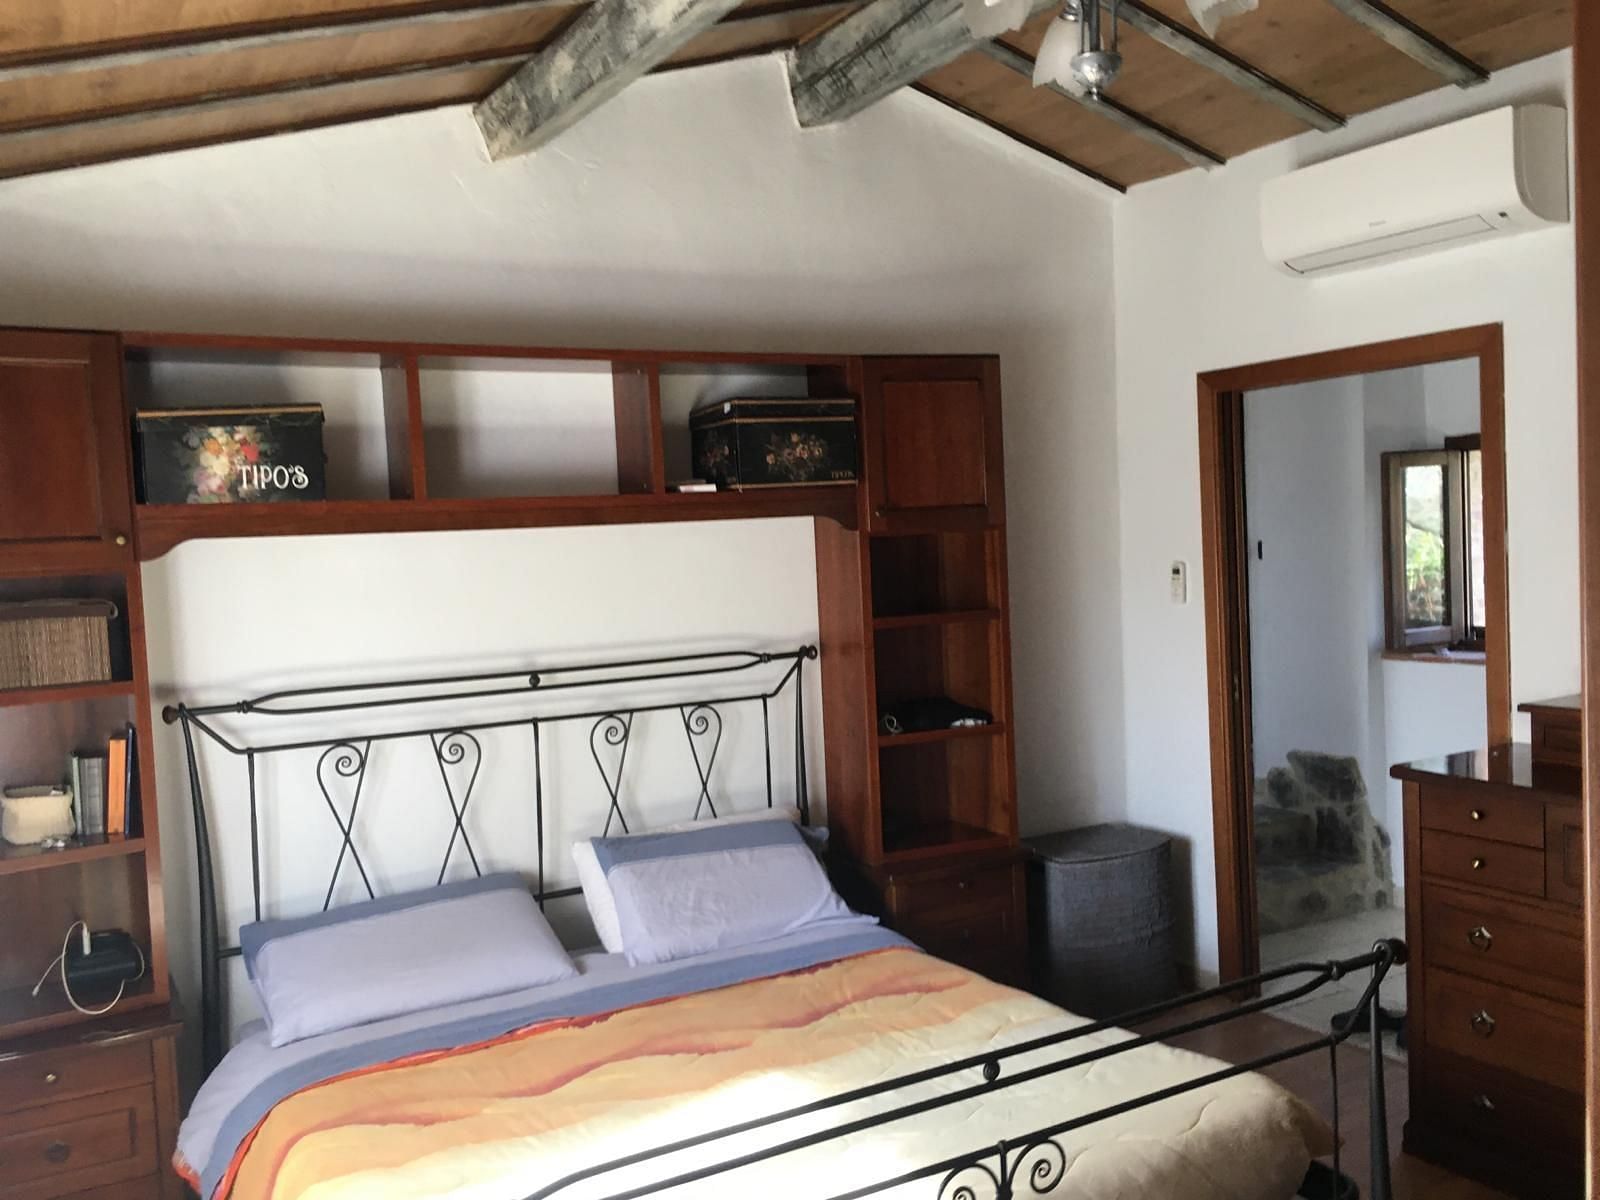 JWguest House at Zona Industriale, Toscana | Charming stone house in typical Tuscan style | Jwbnb no brobnb 11